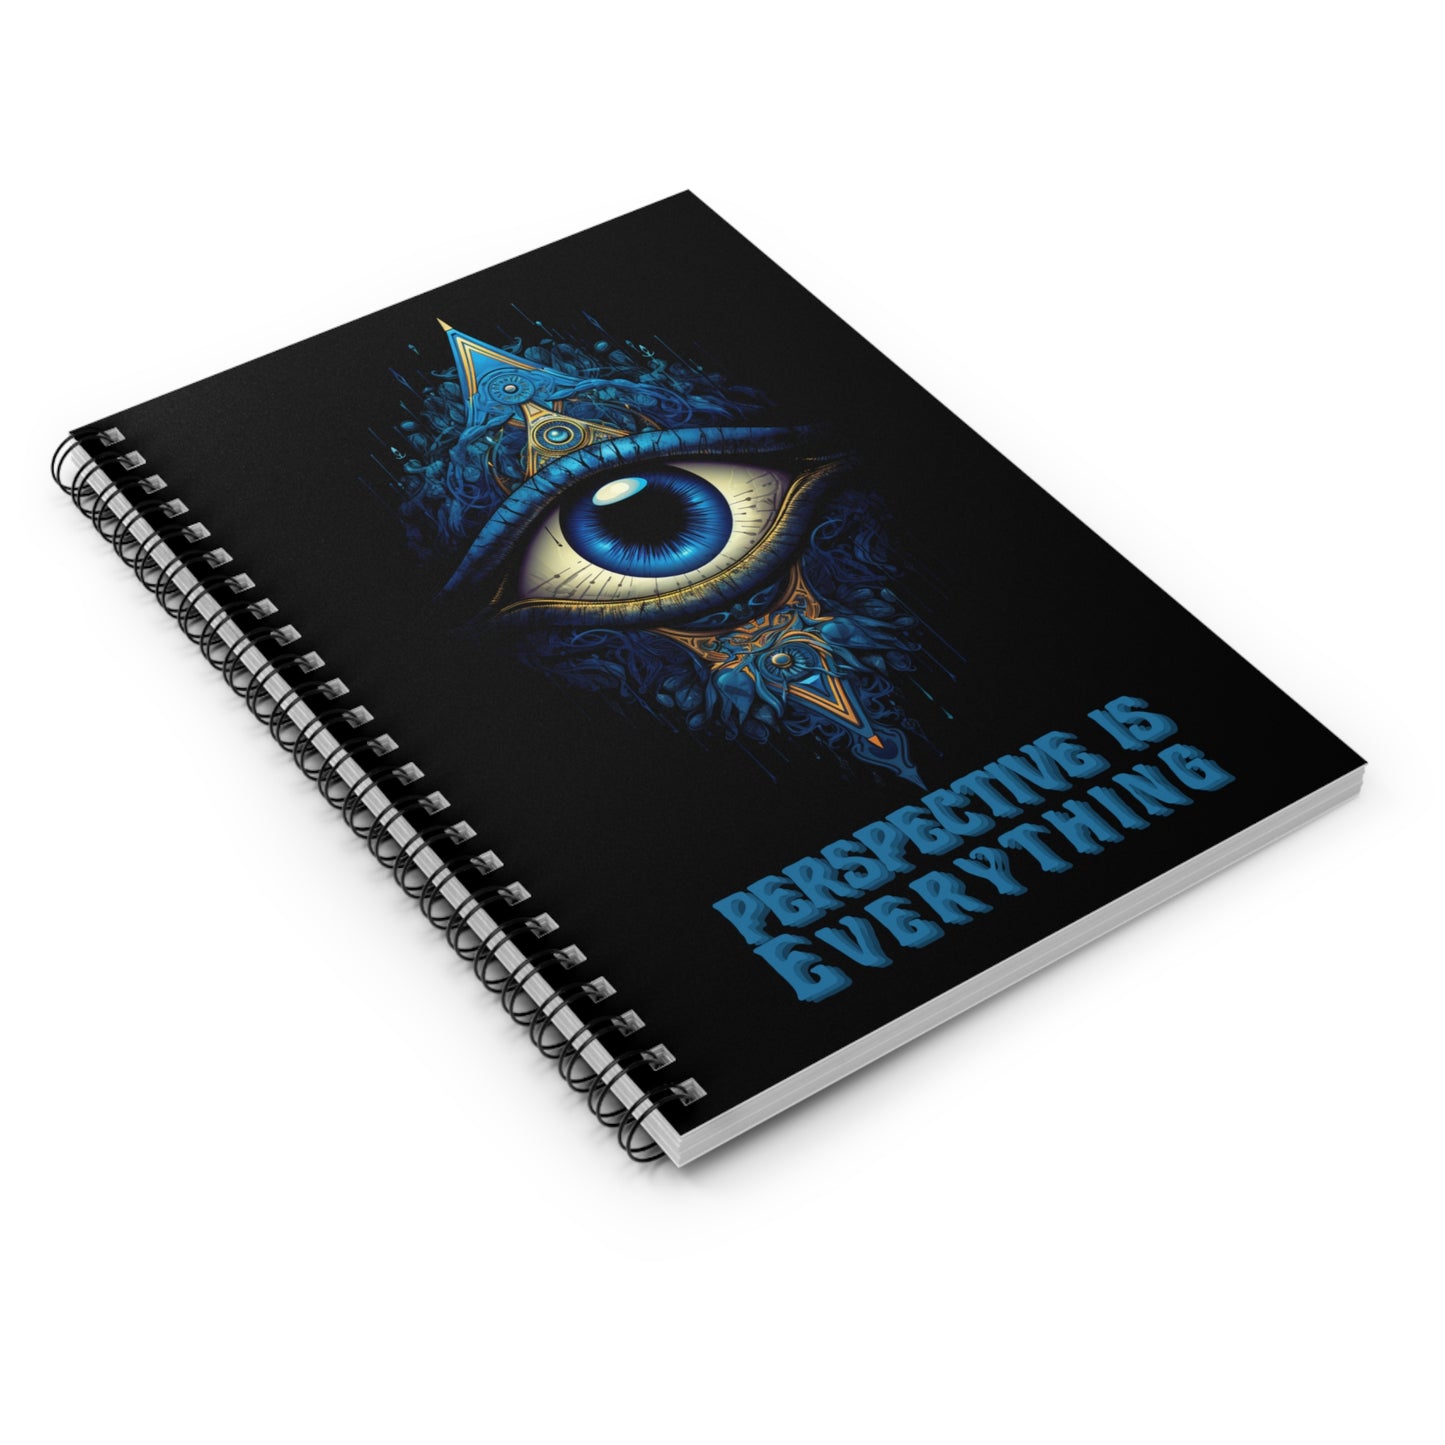 Perspective is Everything: Blue | Spiral Notebook - Ruled Line